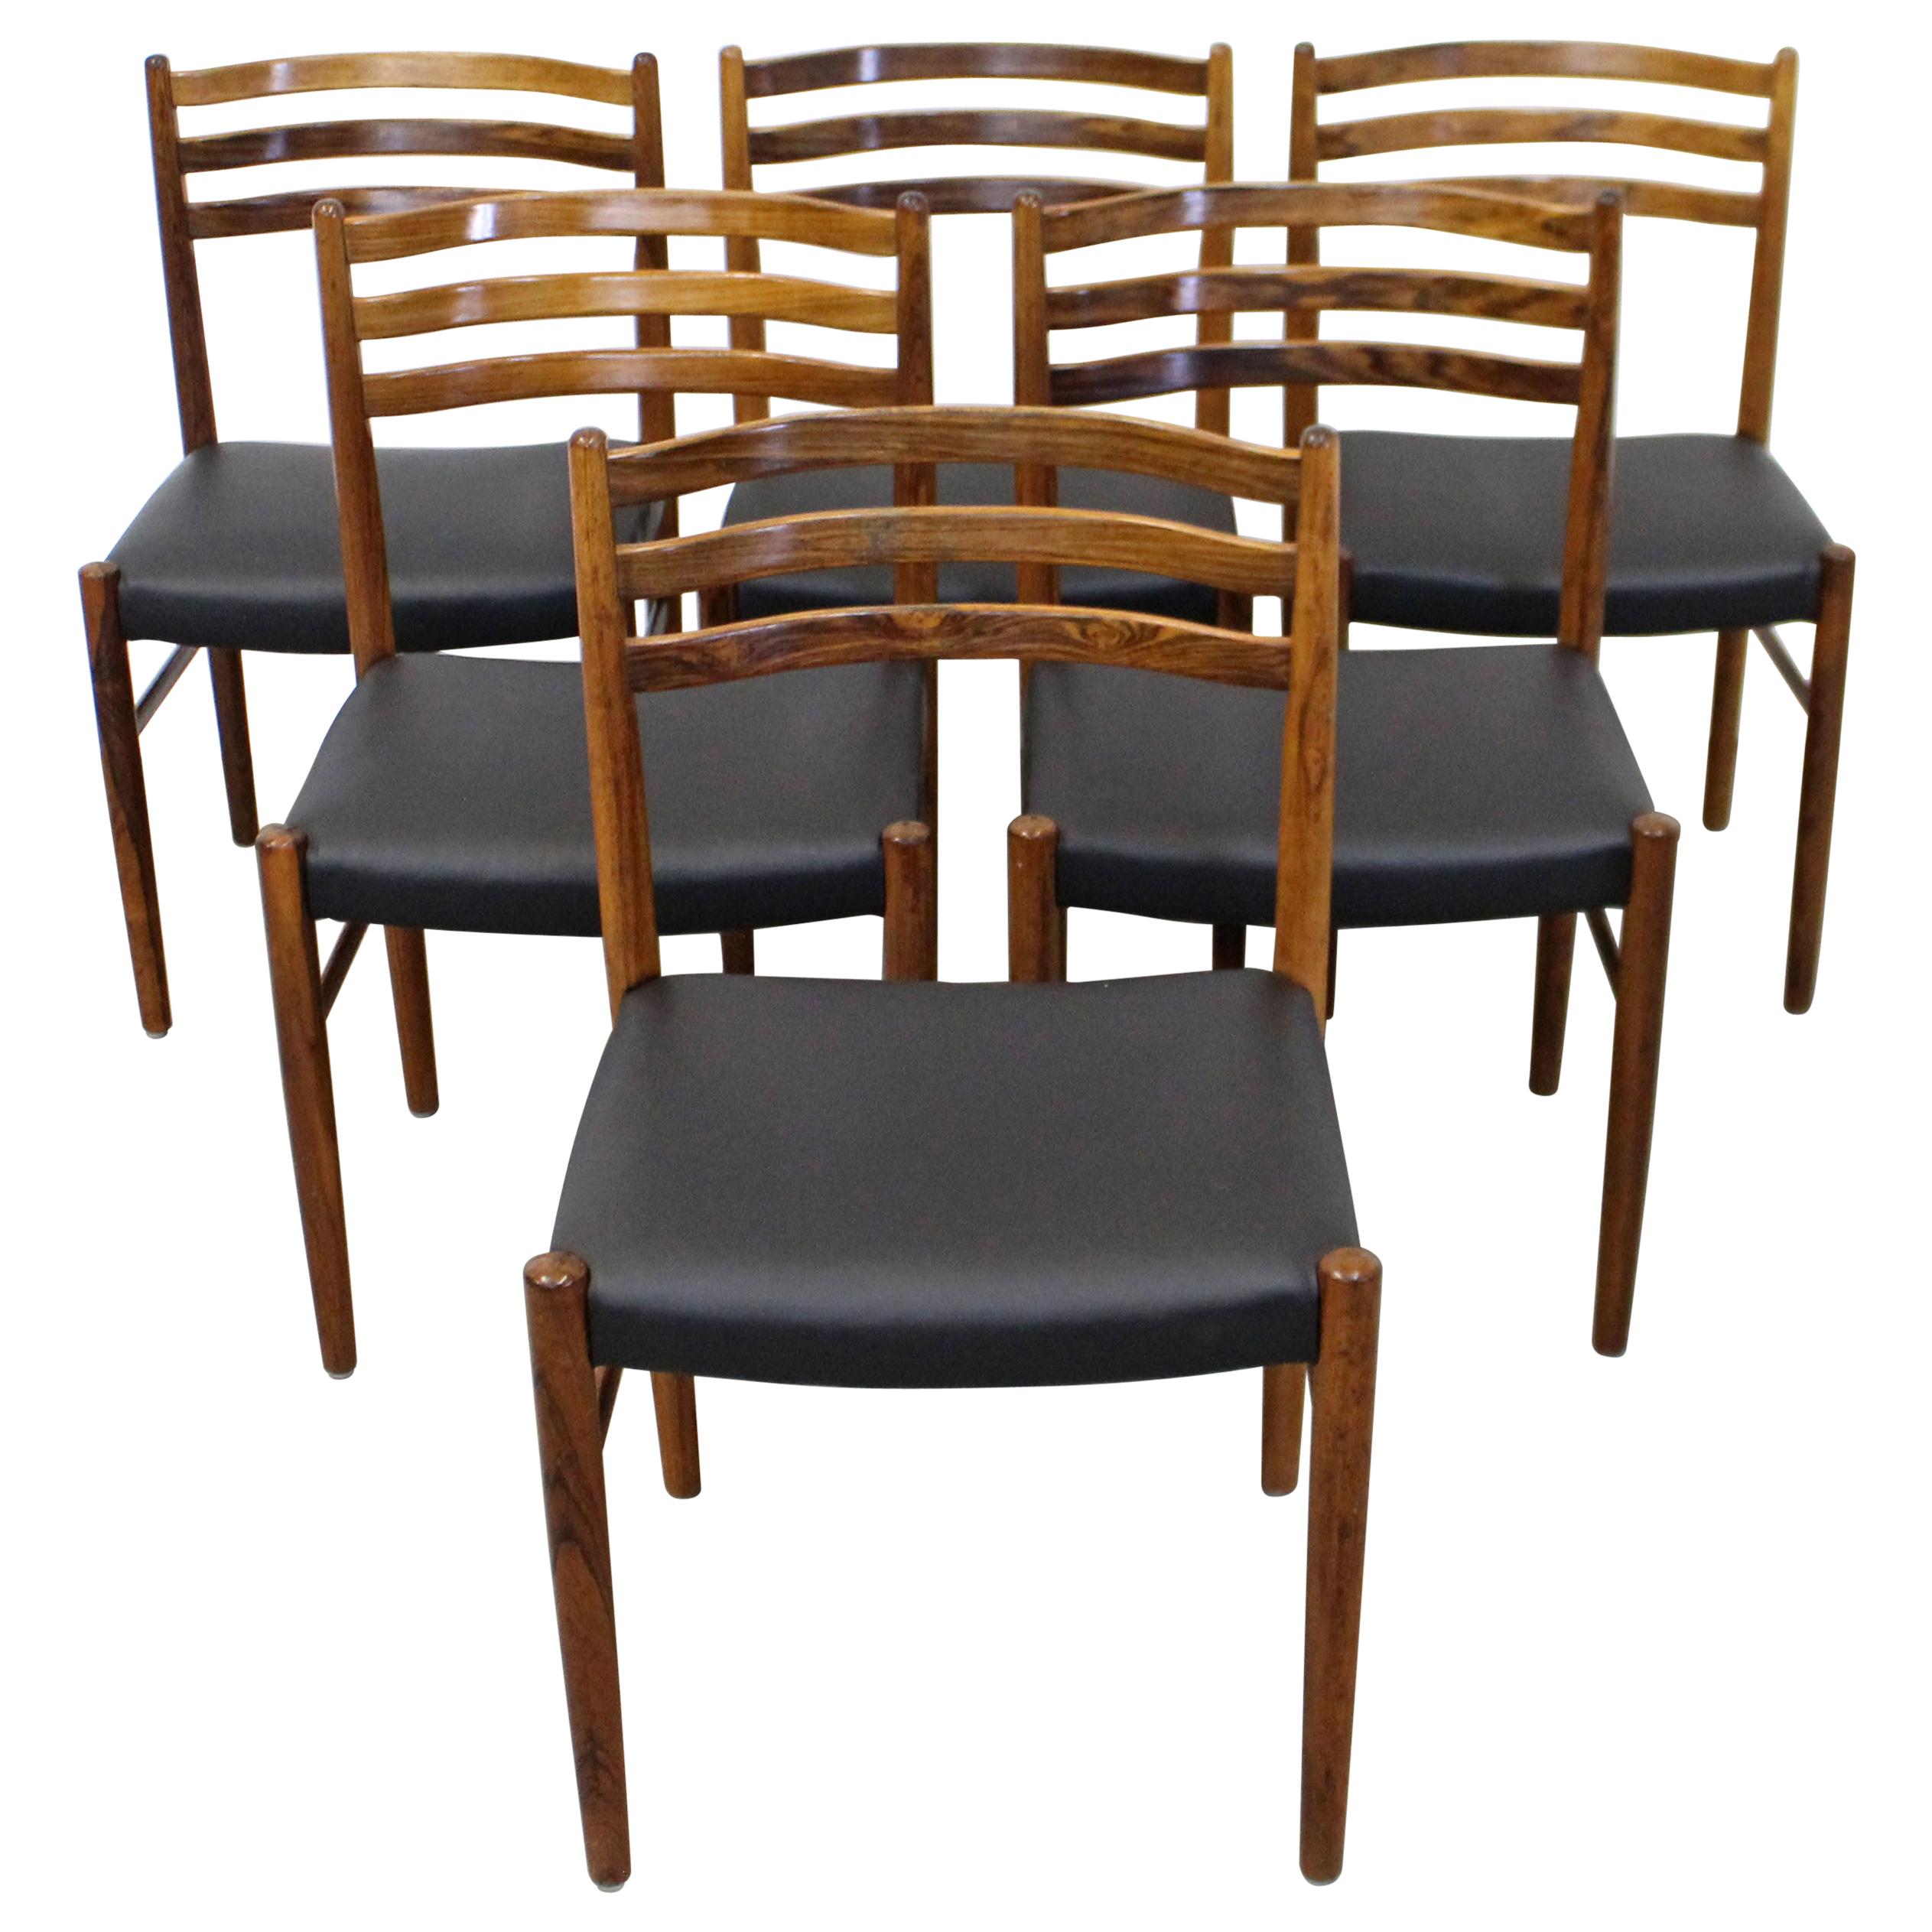 Set of 6 Mid-Century Modern Rosewood and Leather Dining Chairs